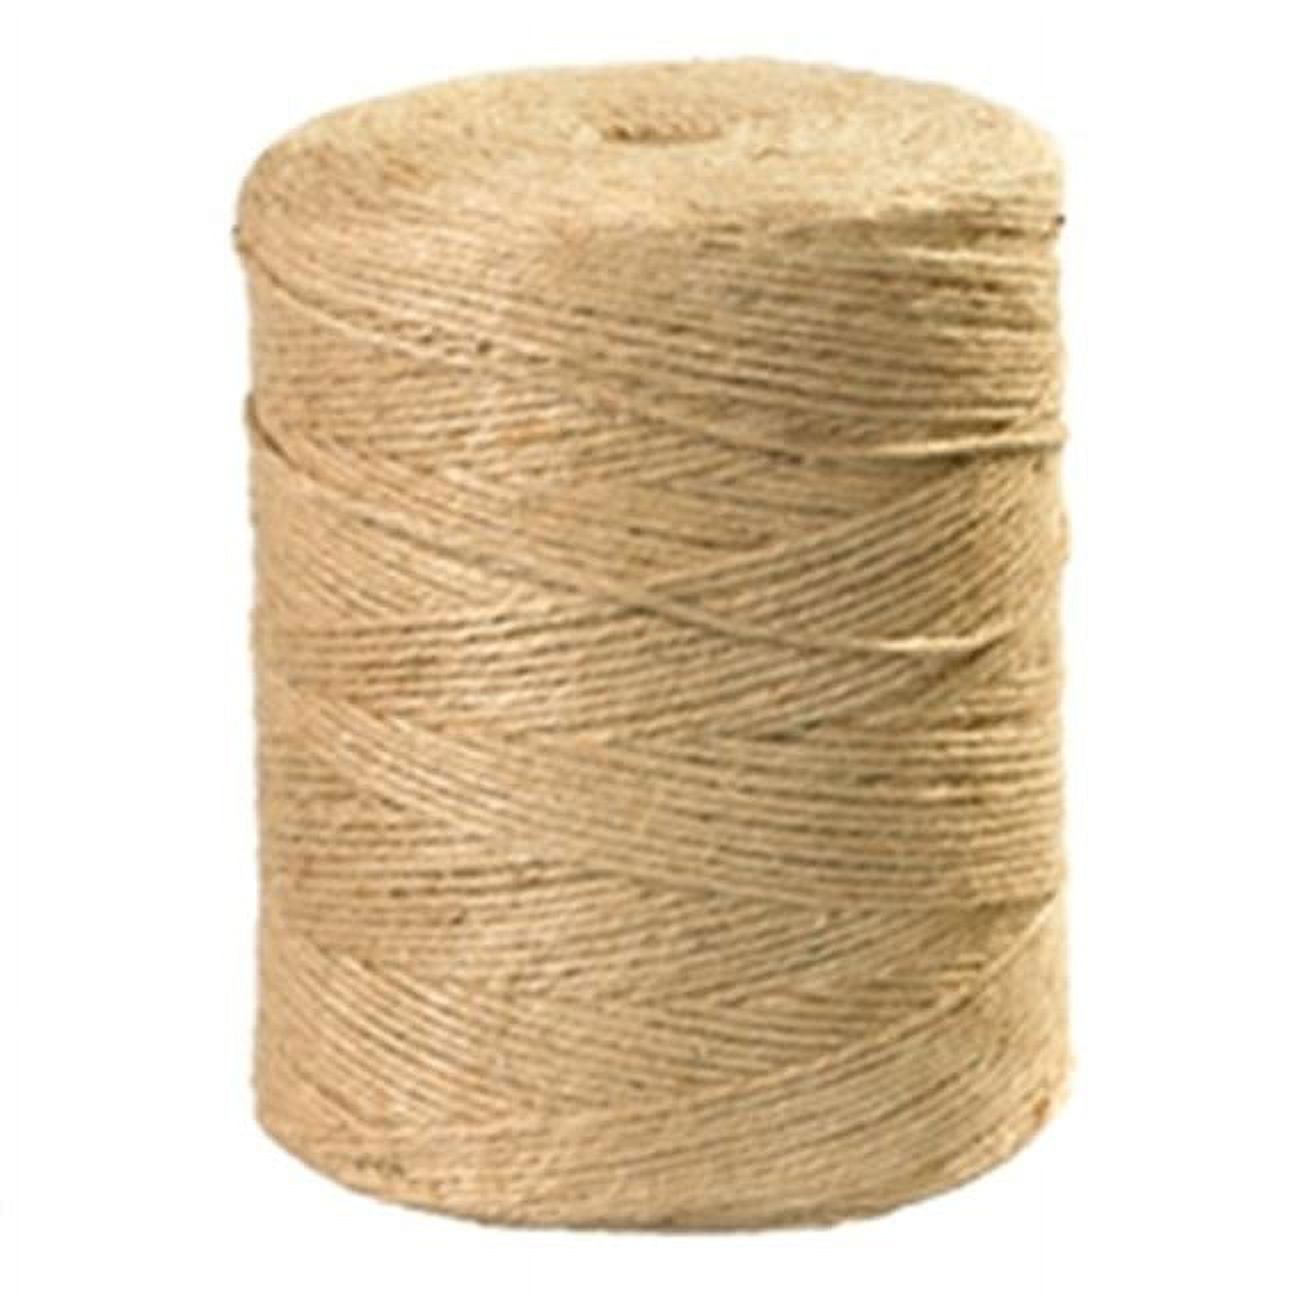 Picture of Box Partners TWJ300 5-Ply 140 lbs Natural Jute Twine